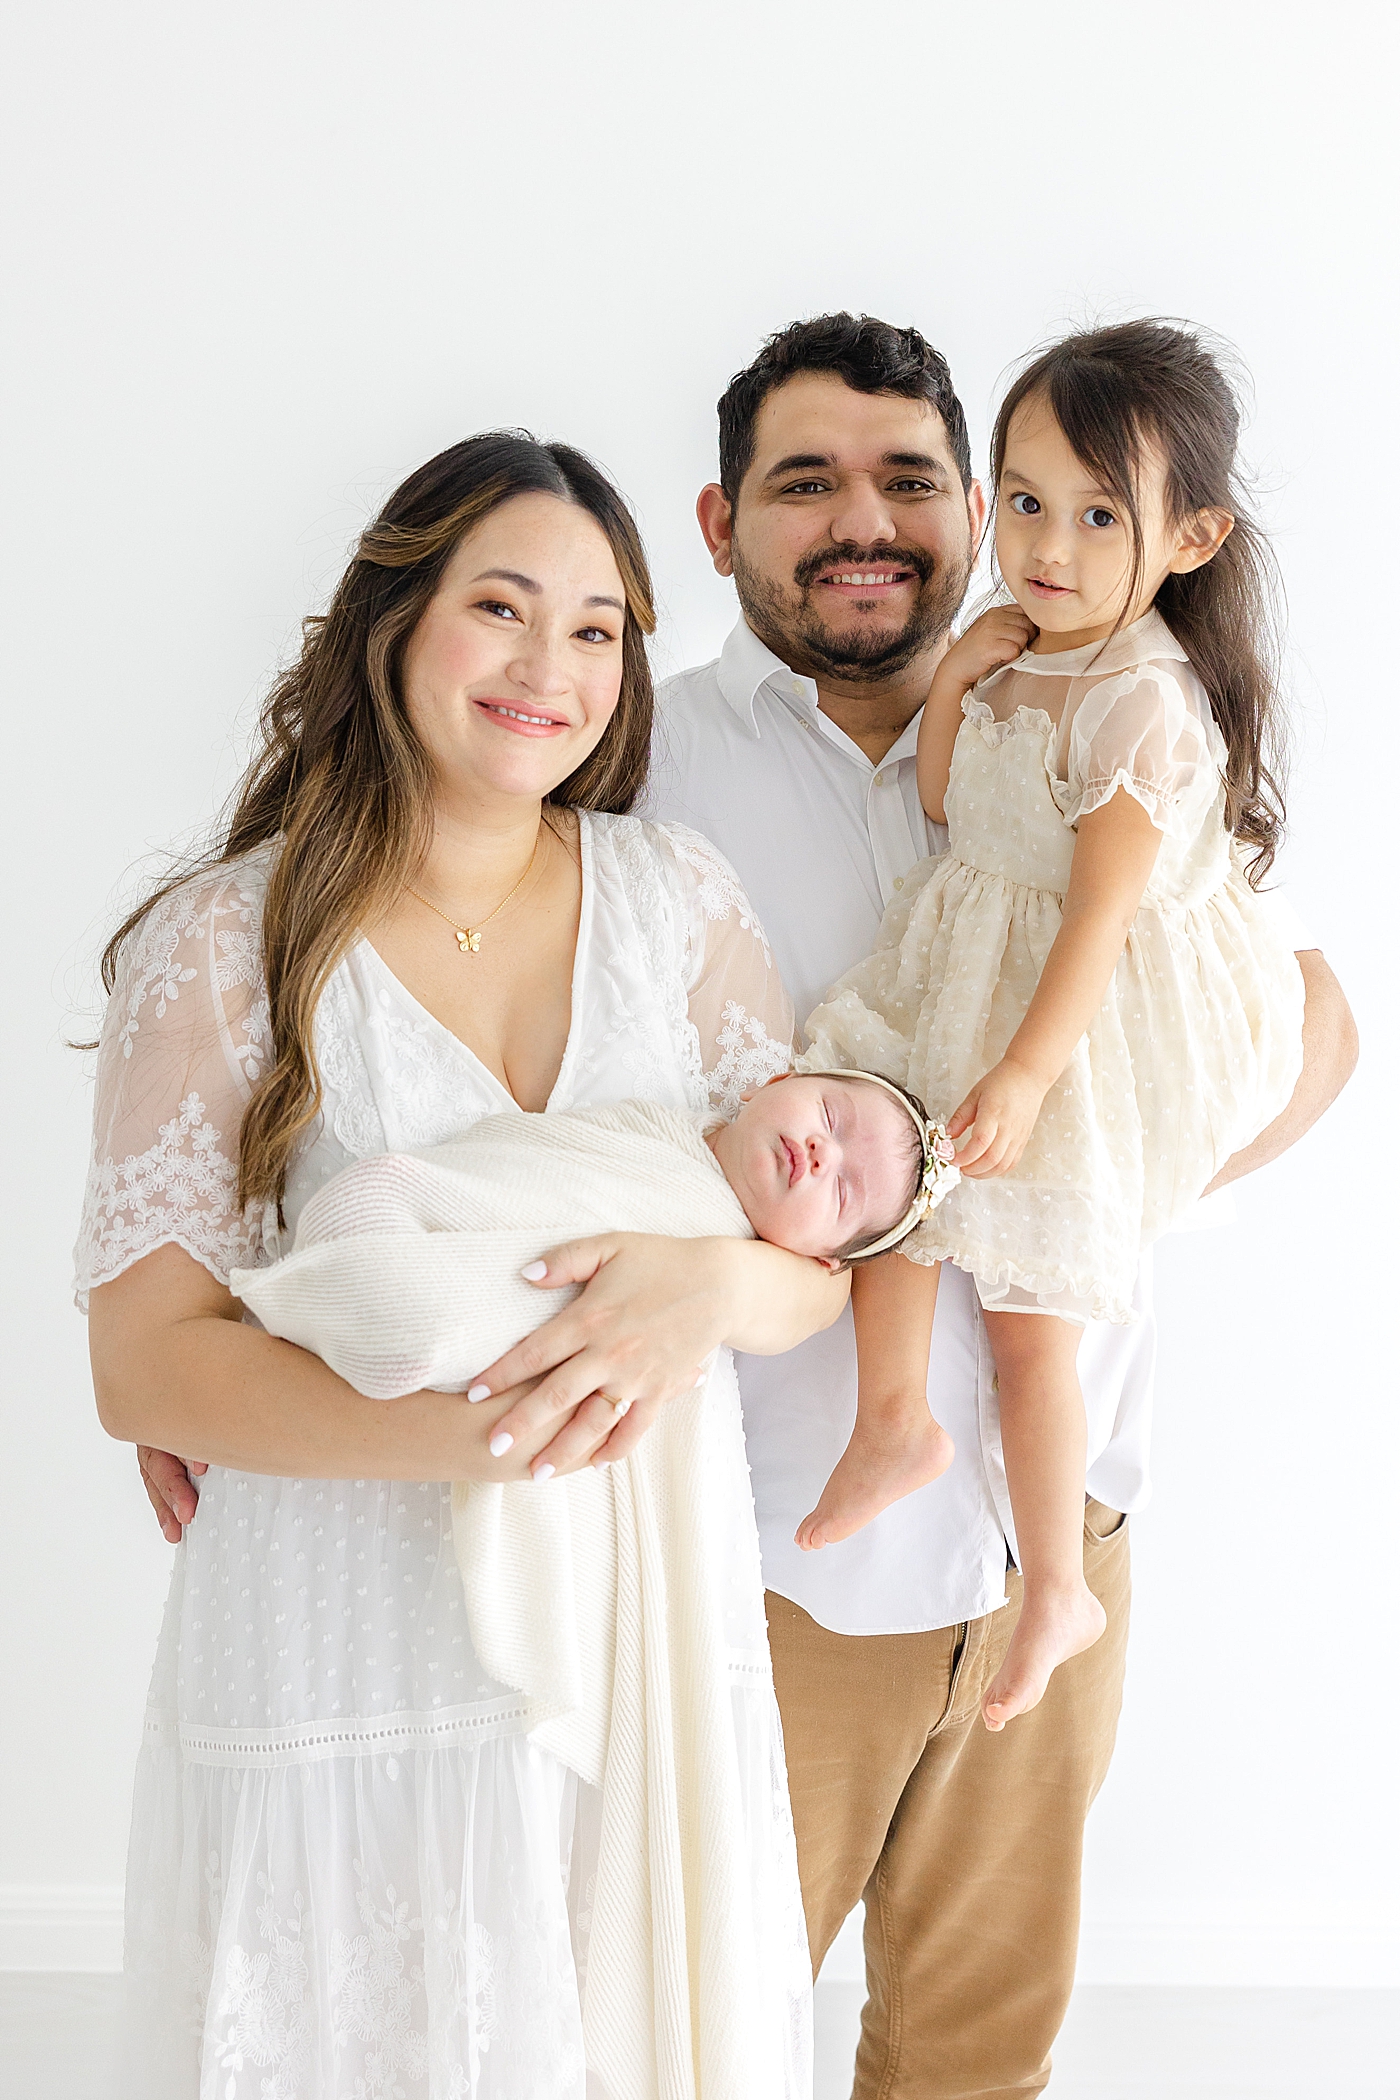 Mom and dad holding their kids during her Austin Studio Newborn Session | Photo by Sana Ahmed Photography